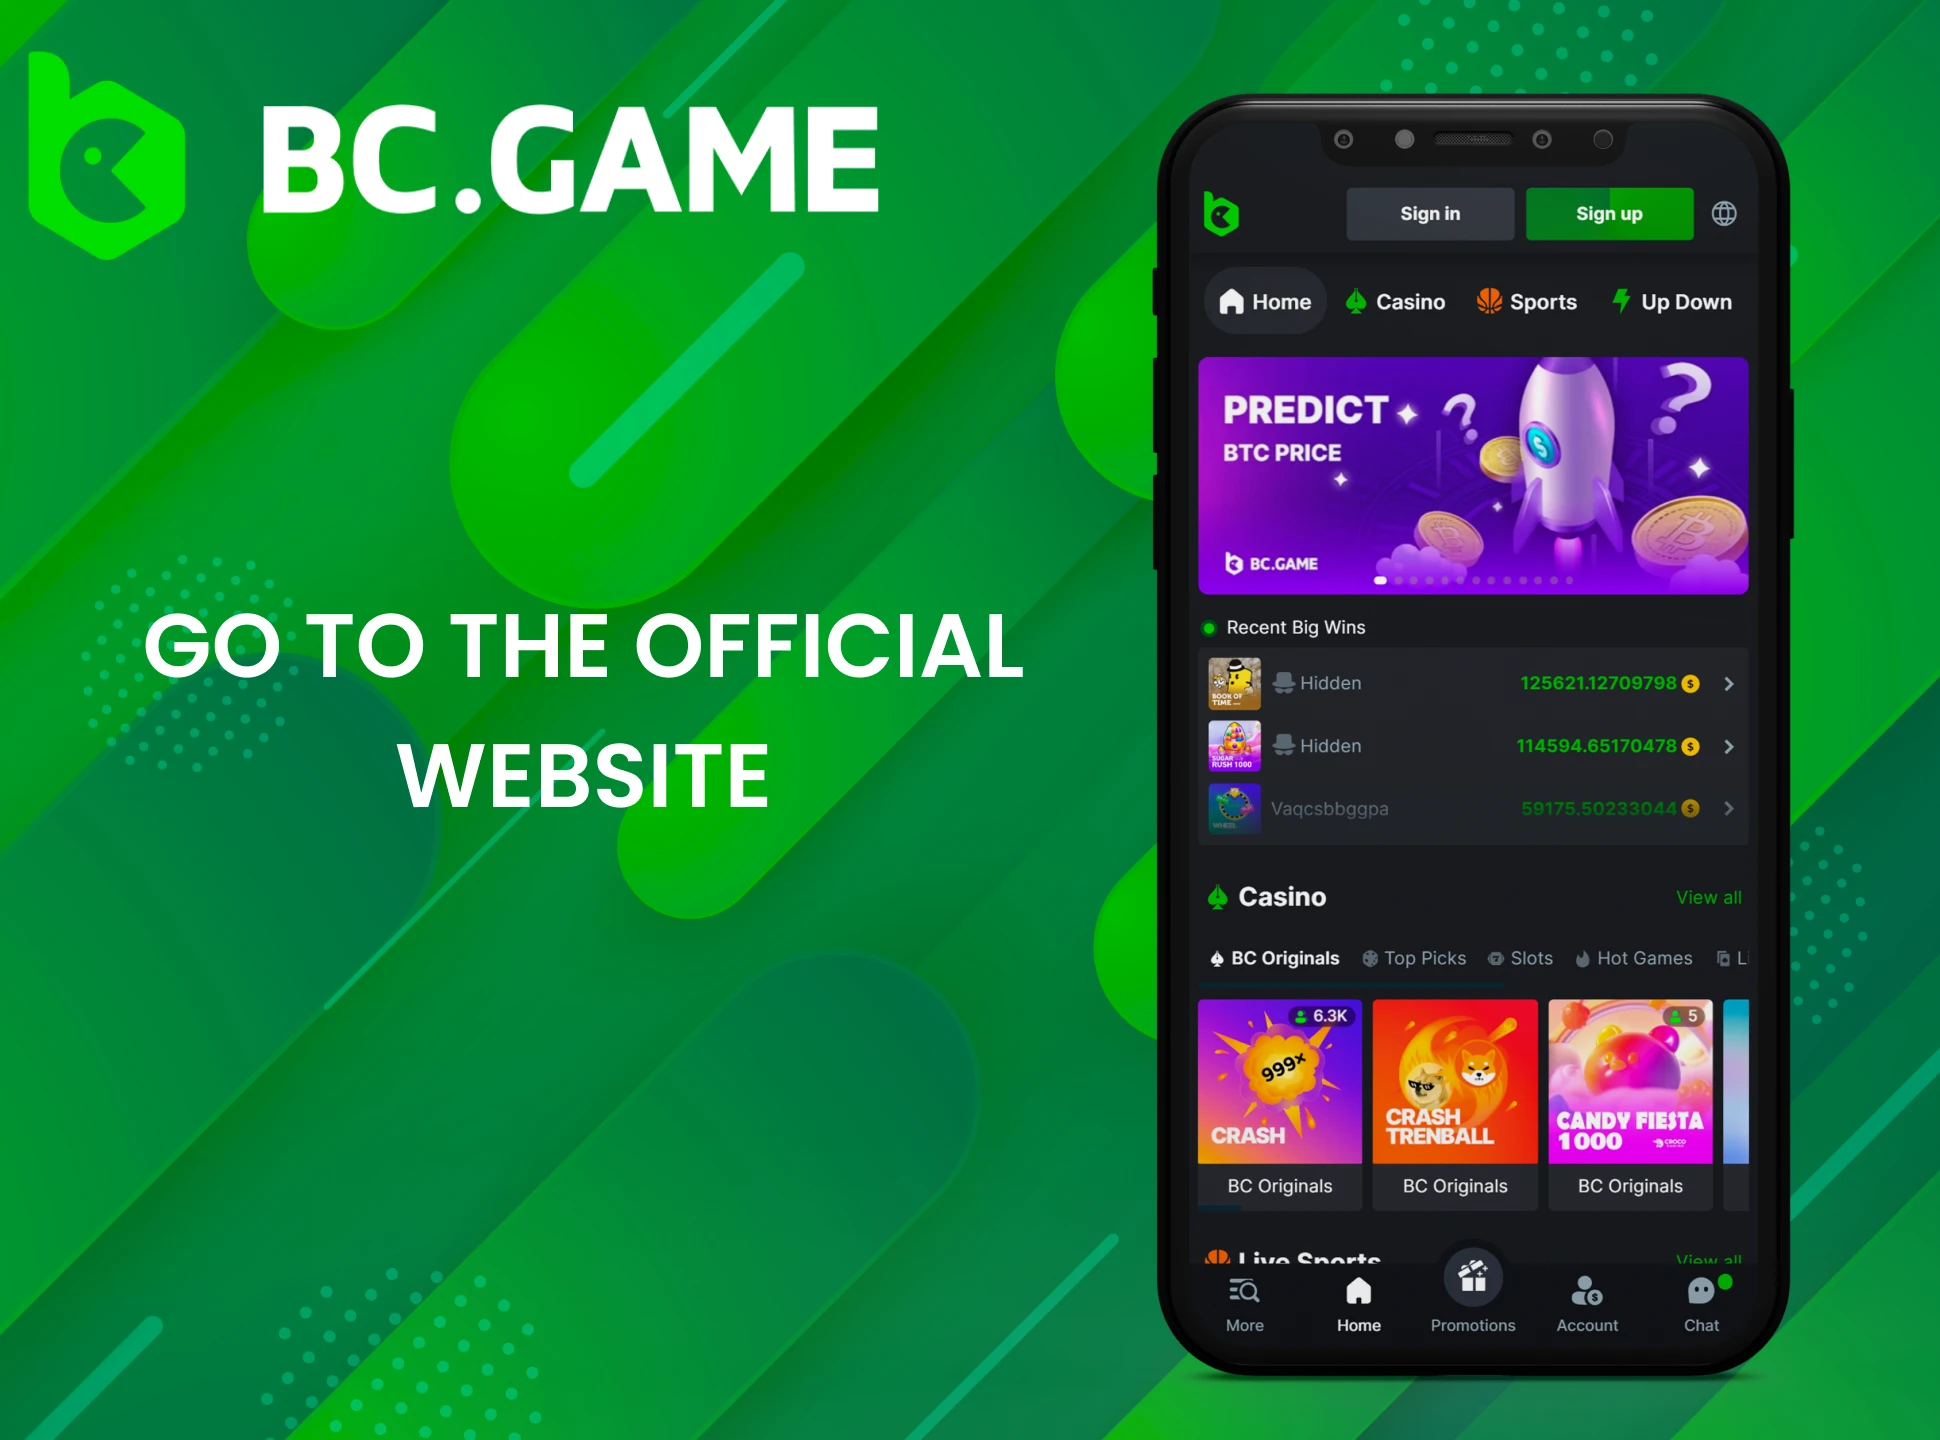 To download the BC Game app on your iOS device, visit their website.